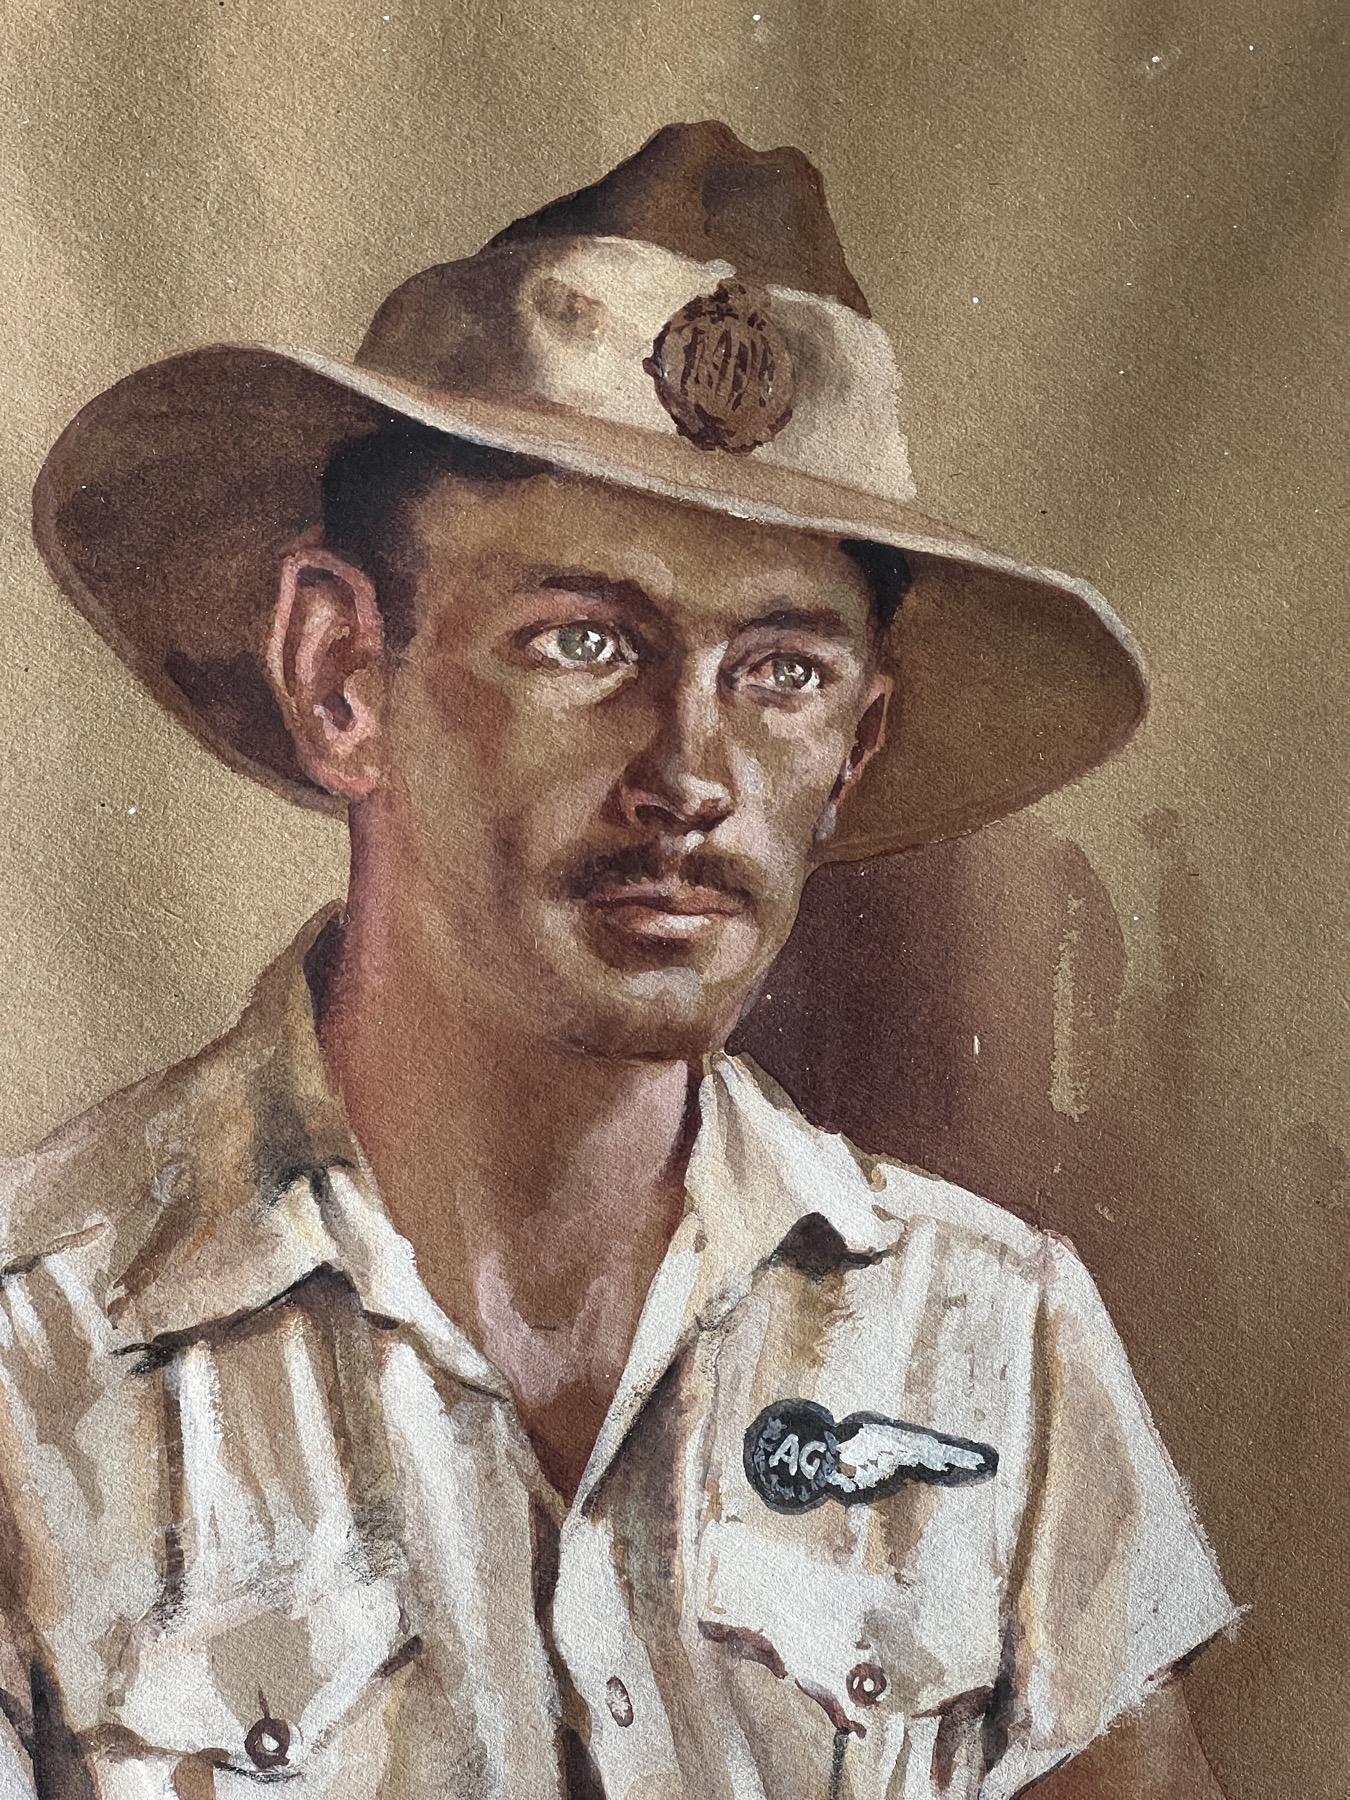 Clifford Dudley-Wood's portrait of RAAF officer Peter Napier Munro, 1945